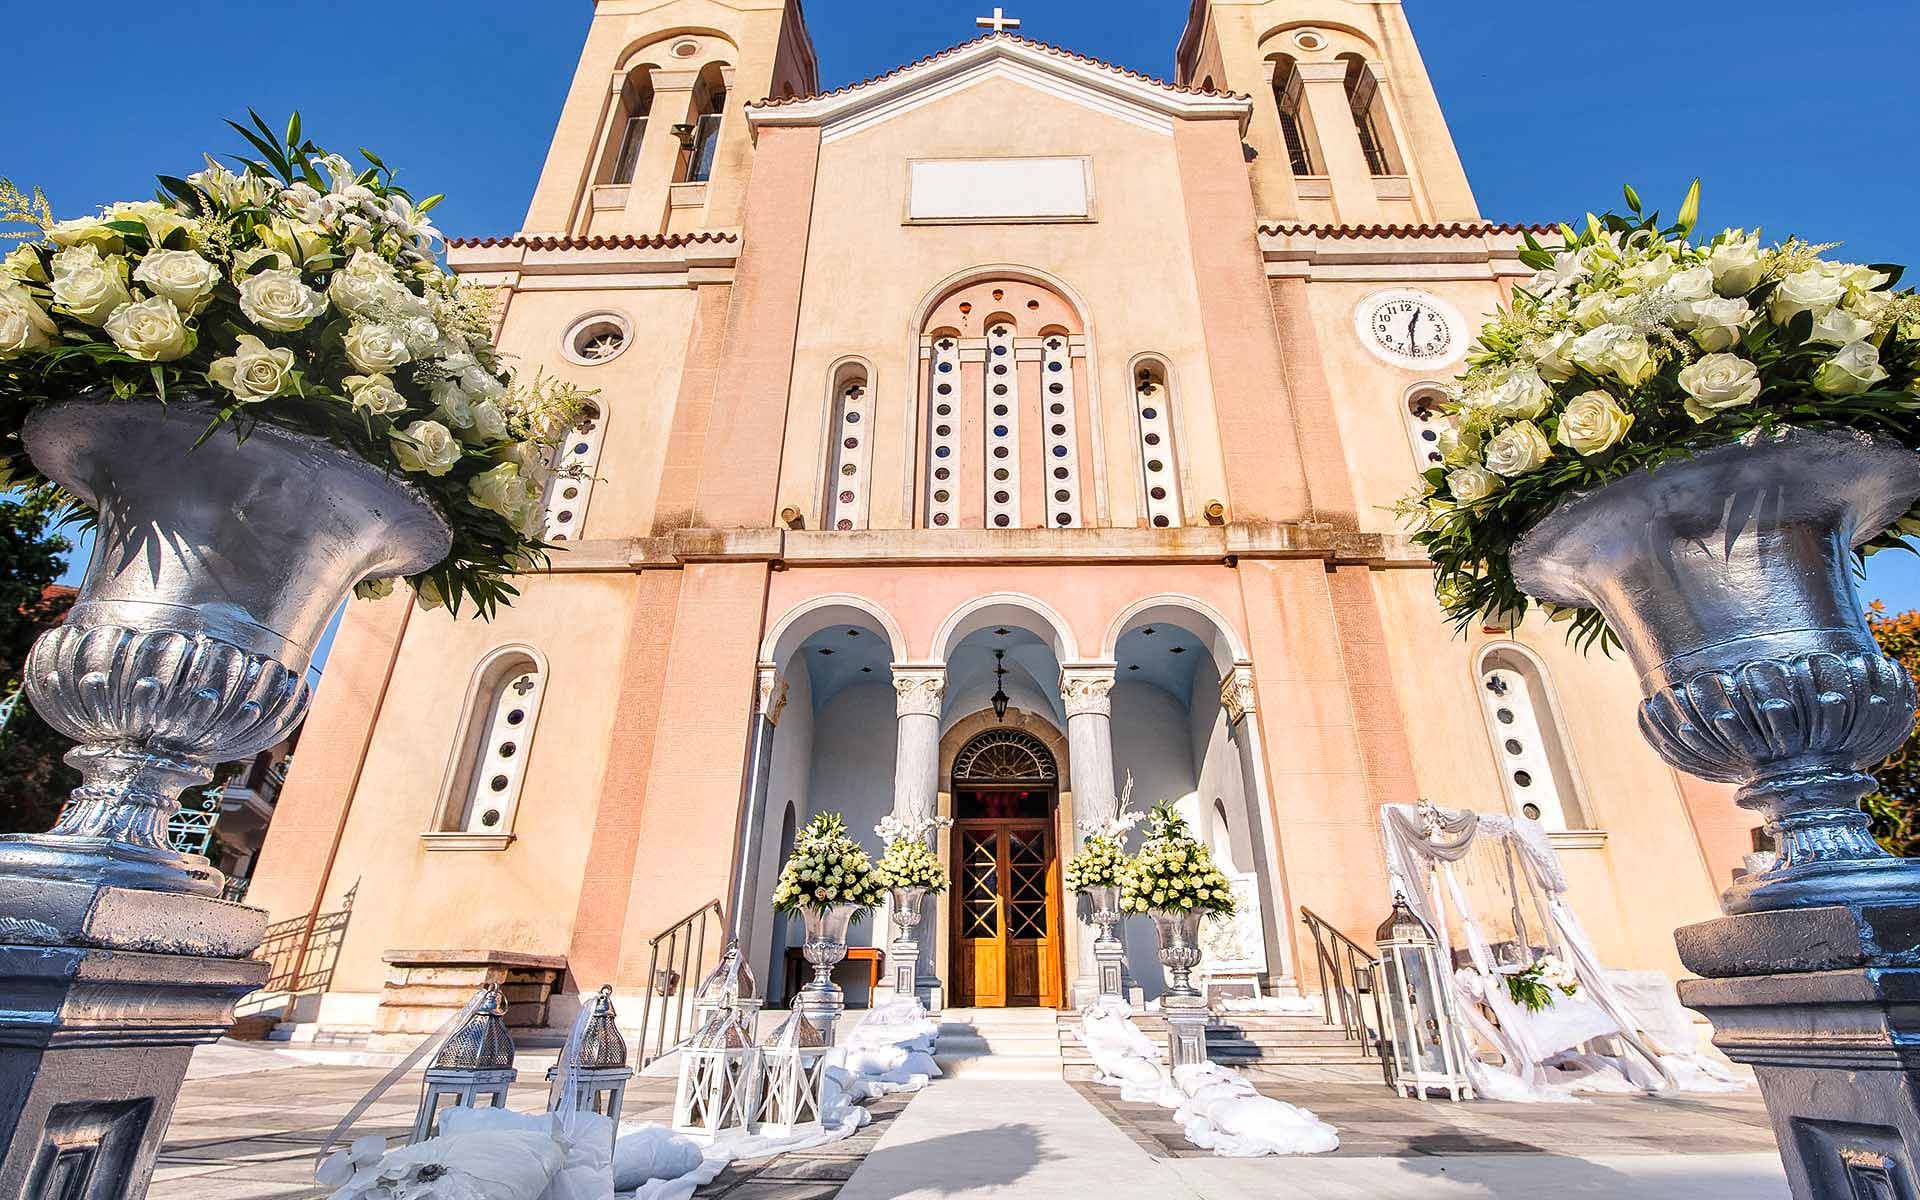 Luxurious-wedding-church-decoration-with-silver-urns-and-white-flowers-by-Diamond-Events